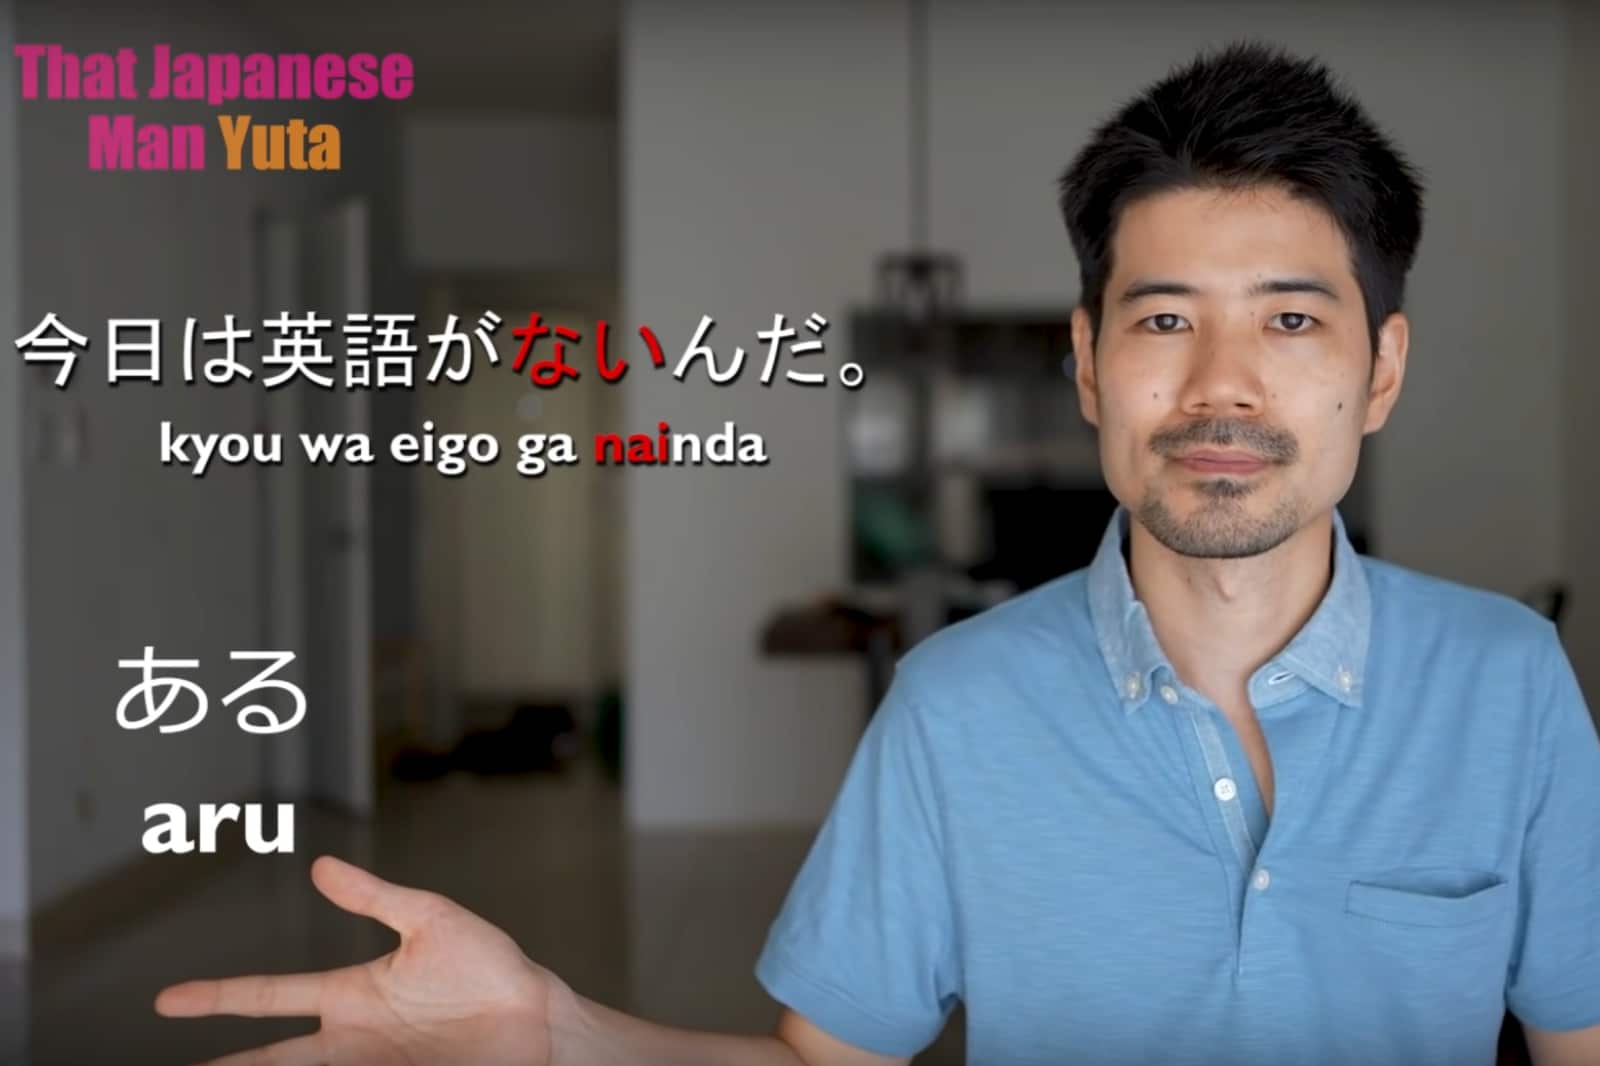 Viewing Learn Japanese For Adult Beginners: Speak Japanese In 30 Days!: 3  Books in 1 Review Copy